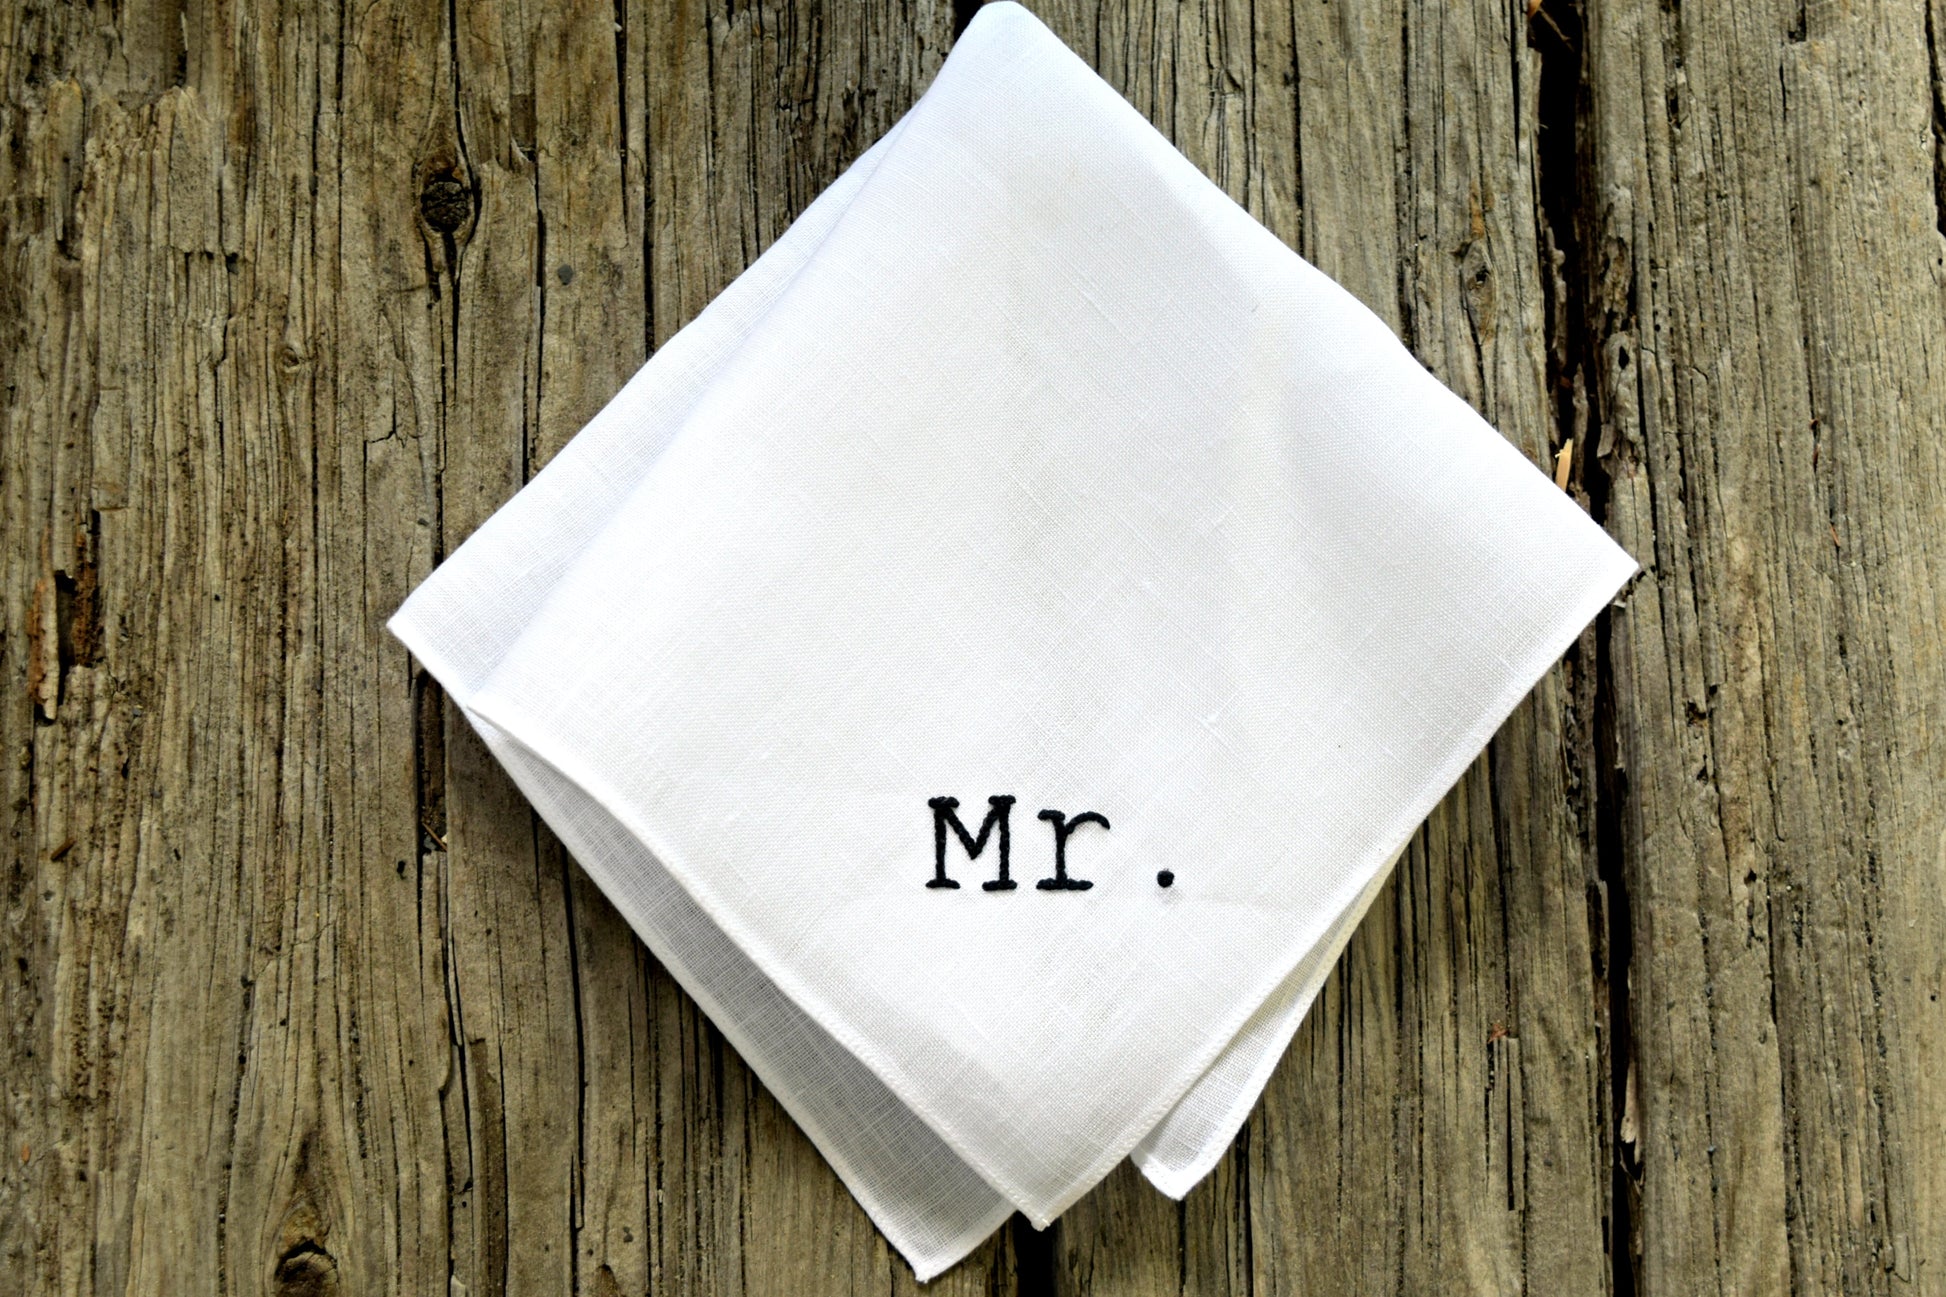 New groom handkerchief embroidered Mr. in block typewriter font in black on wood background